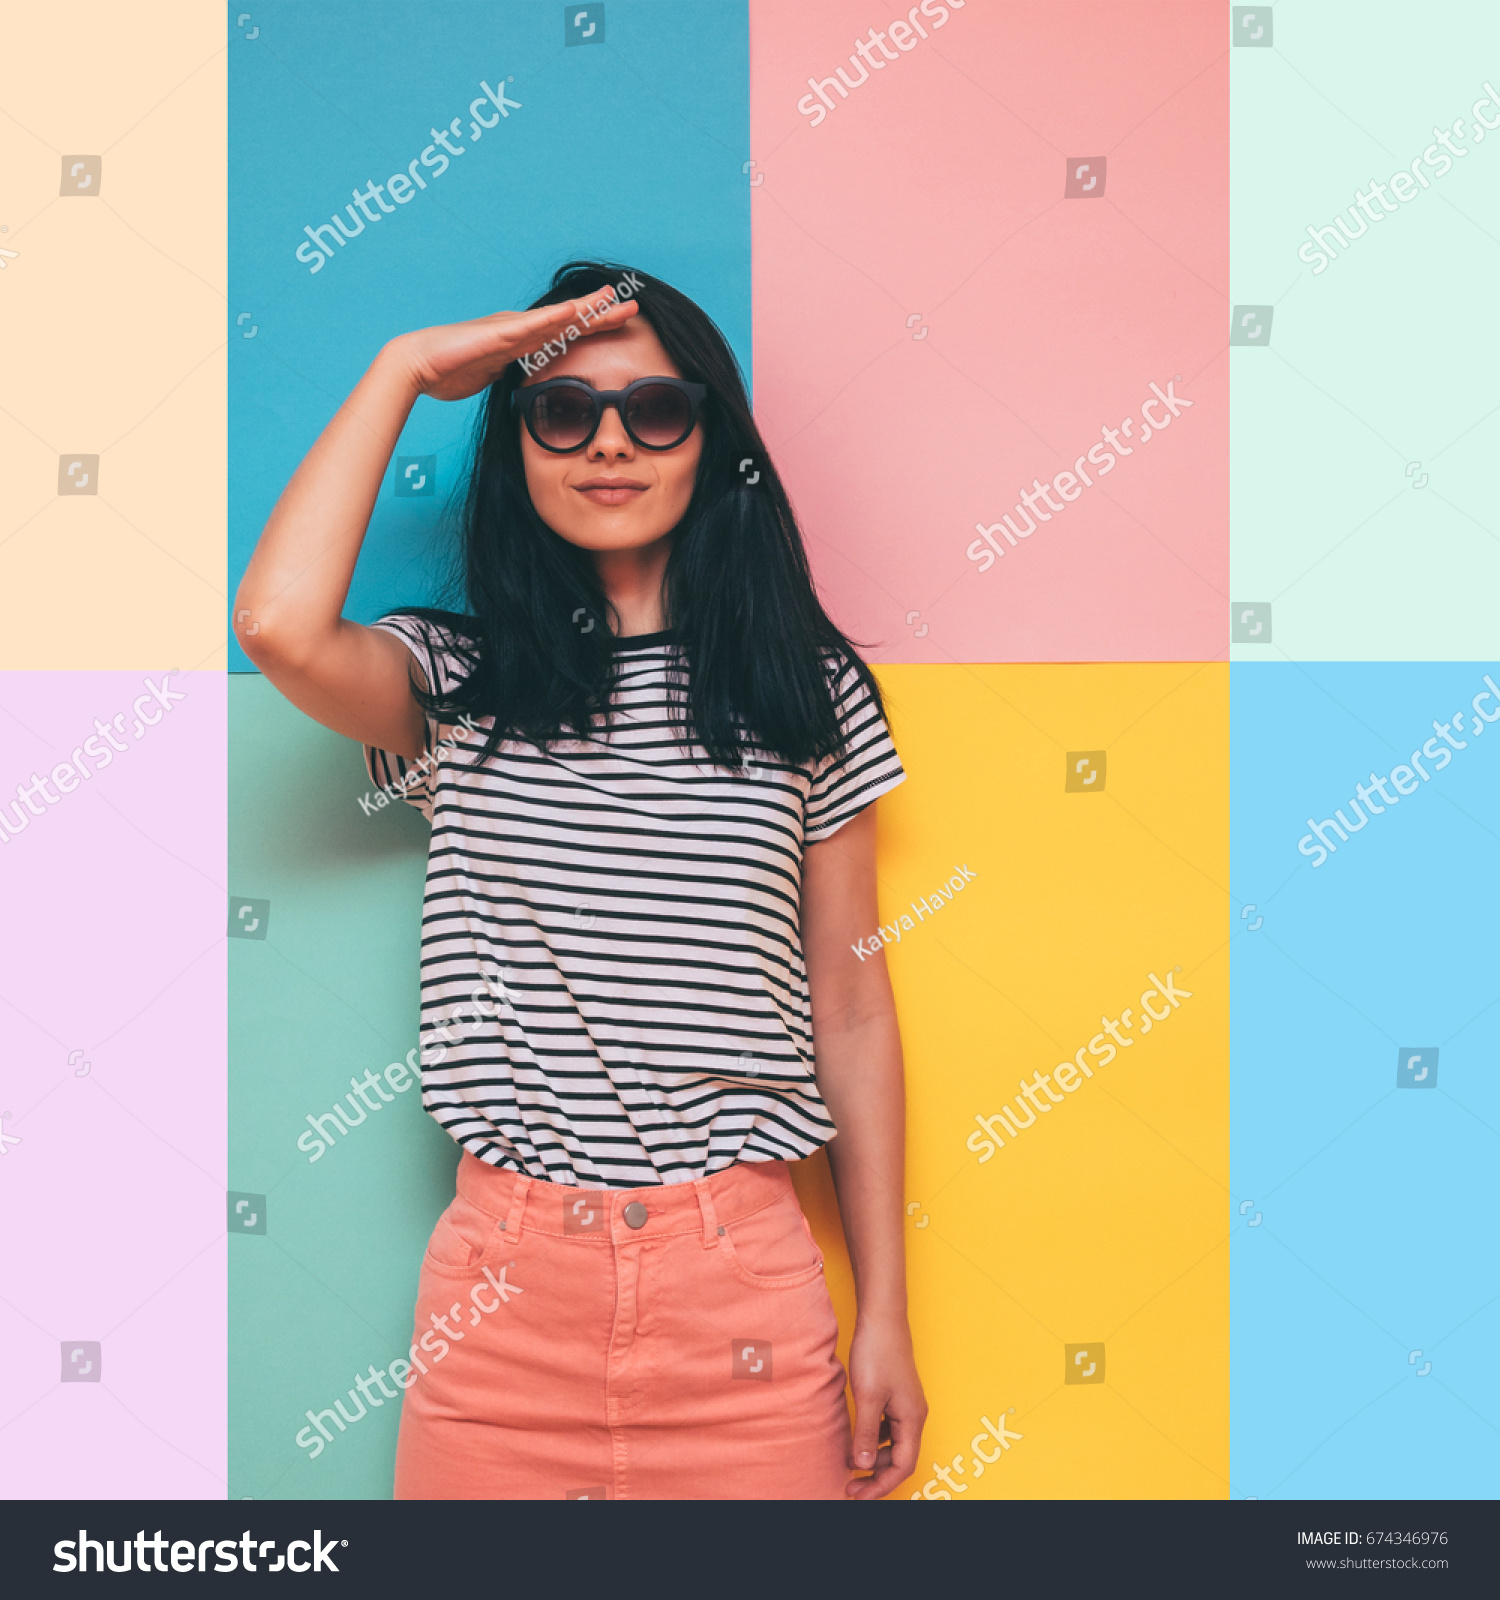 the woman salutes. fashionable pink denim skirt, and trendy stripes on the shirt. #674346976